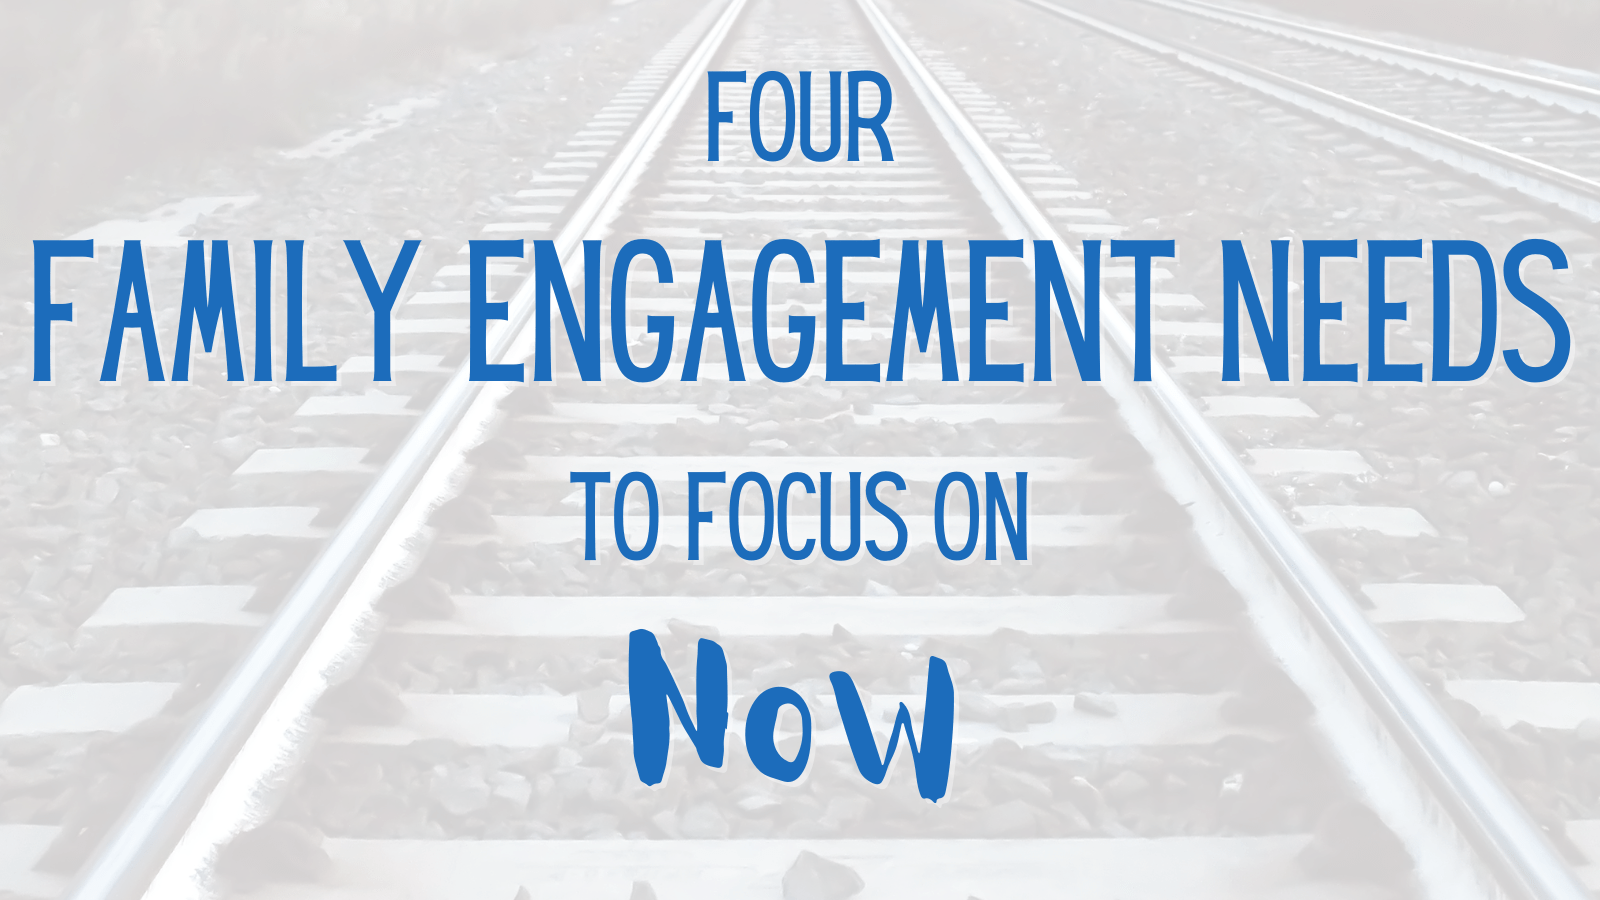 Family engagement needs